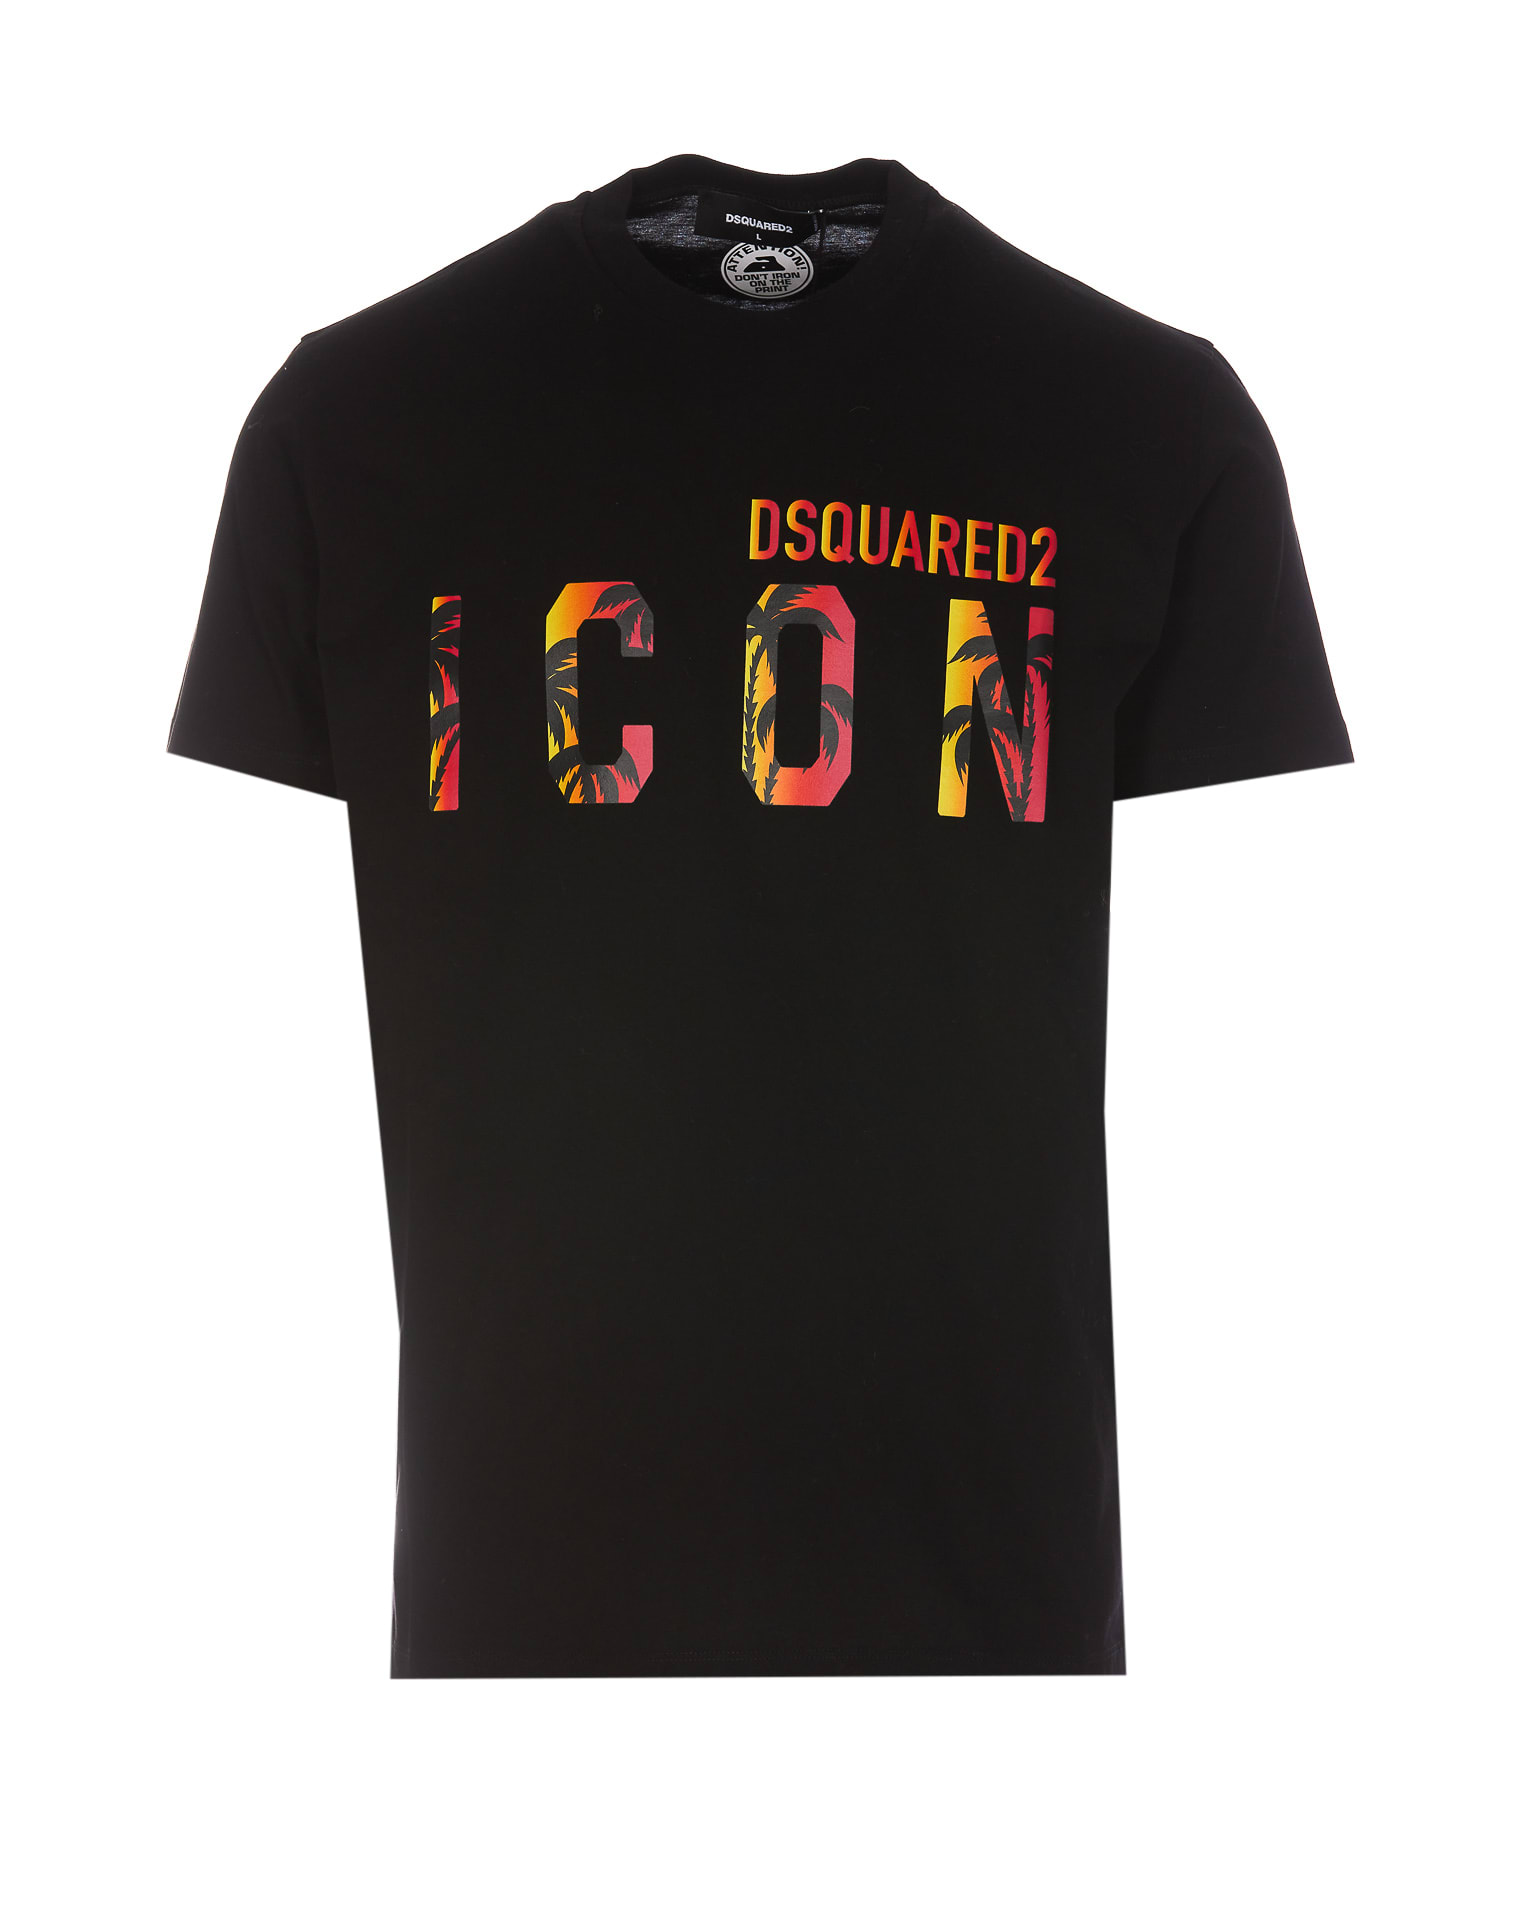 DSQUARED2 ICON SUNSET COOL T-SHIRT